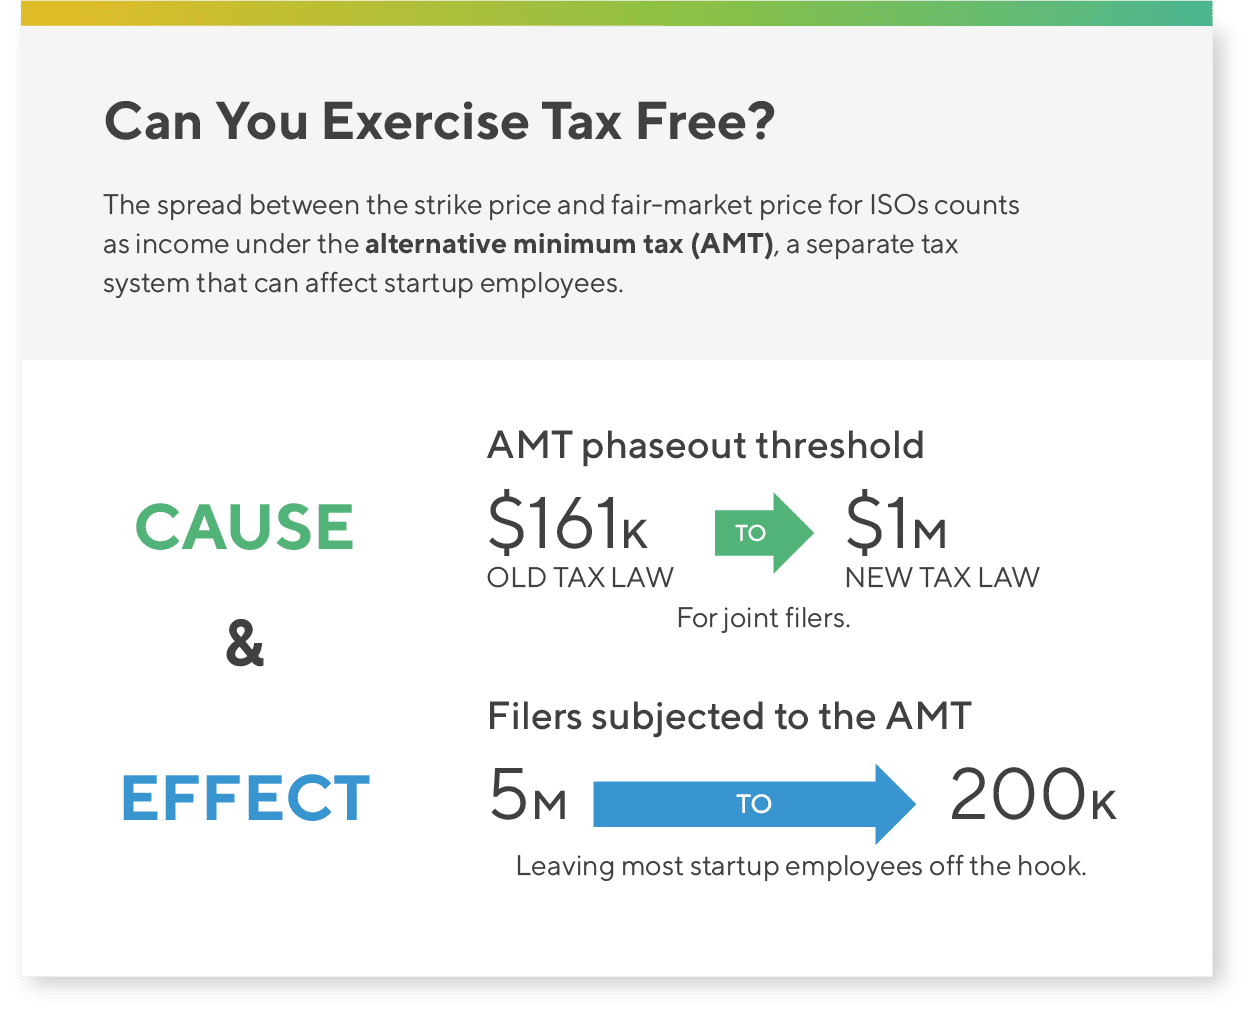 Can You Exercise Tax Free?